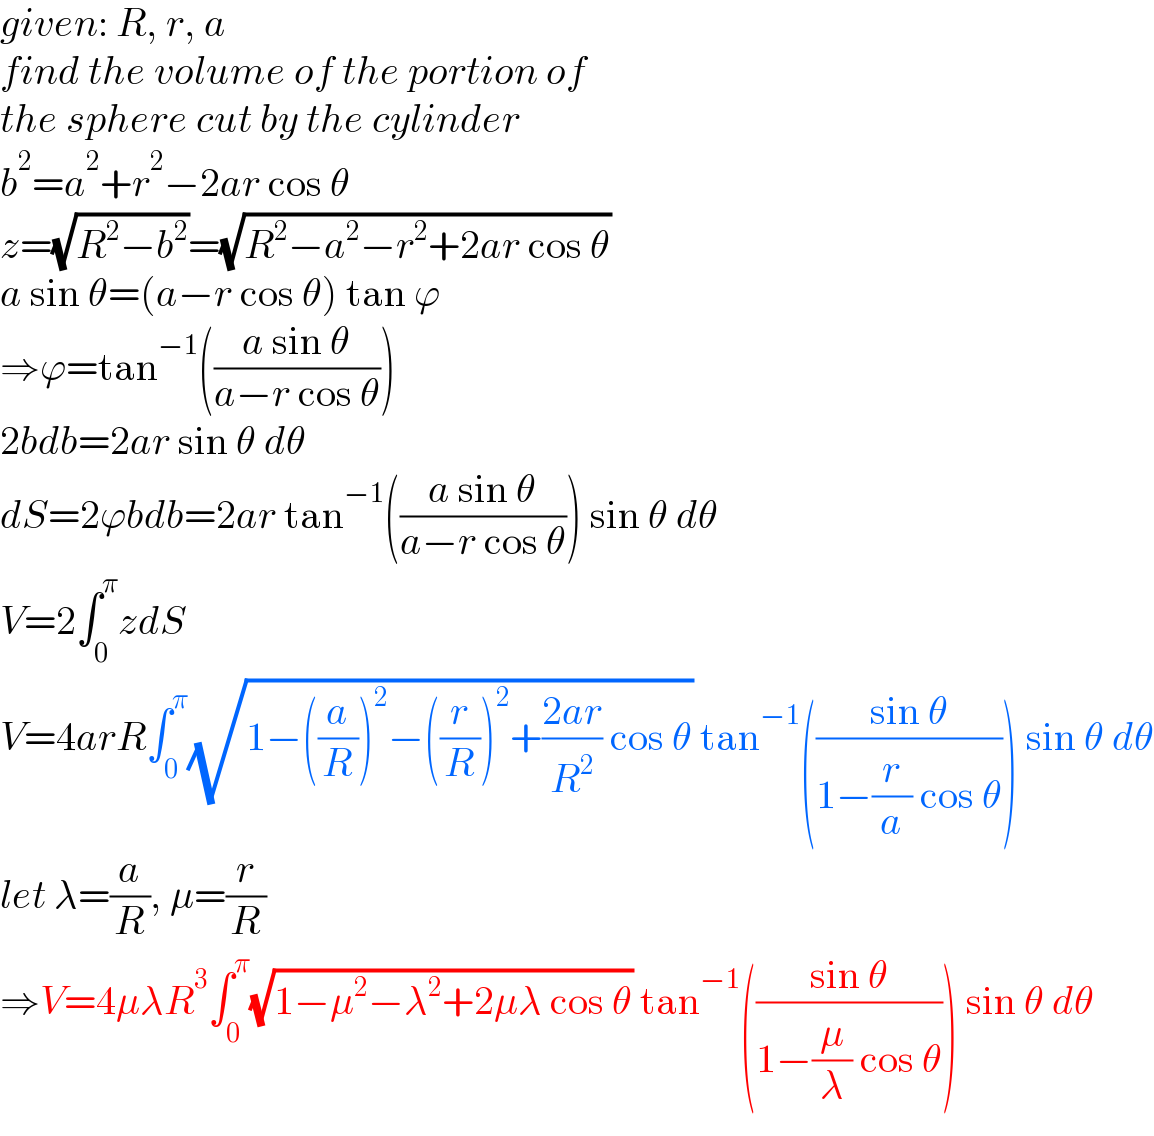 given: R, r, a  find the volume of the portion of  the sphere cut by the cylinder  b^2 =a^2 +r^2 −2ar cos θ  z=(√(R^2 −b^2 ))=(√(R^2 −a^2 −r^2 +2ar cos θ))  a sin θ=(a−r cos θ) tan ϕ  ⇒ϕ=tan^(−1) (((a sin θ)/(a−r cos θ)))  2bdb=2ar sin θ dθ  dS=2ϕbdb=2ar tan^(−1) (((a sin θ)/(a−r cos θ))) sin θ dθ  V=2∫_0 ^π zdS  V=4arR∫_0 ^π (√(1−((a/R))^2 −((r/R))^2 +((2ar)/R^2 ) cos θ)) tan^(−1) (((sin θ)/(1−(r/a) cos θ))) sin θ dθ  let λ=(a/R), μ=(r/R)  ⇒V=4μλR^3 ∫_0 ^π (√(1−μ^2 −λ^2 +2μλ cos θ)) tan^(−1) (((sin θ)/(1−(μ/λ) cos θ))) sin θ dθ  